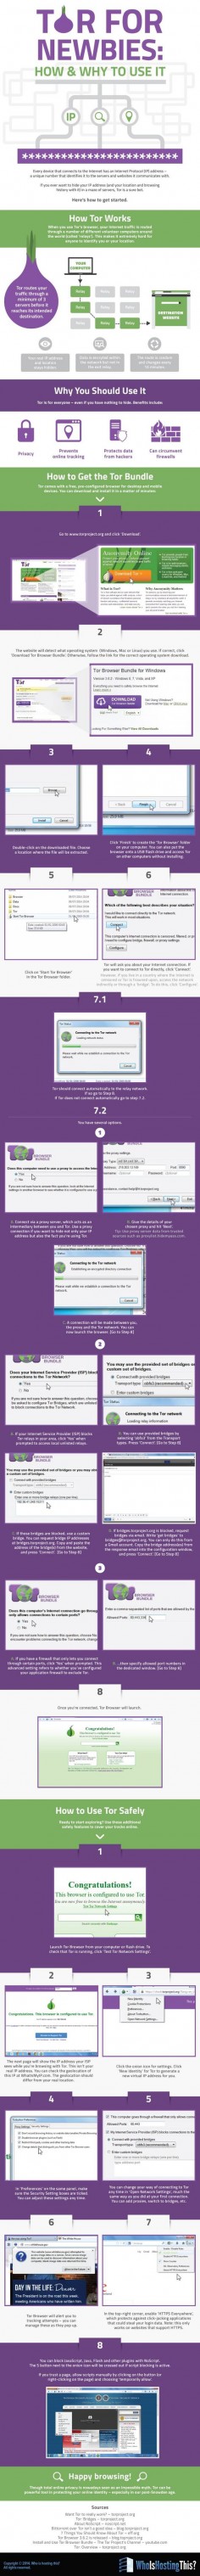 Tor for Newbies: How and Why to Use It #infographic #Browser #Internet #Tor